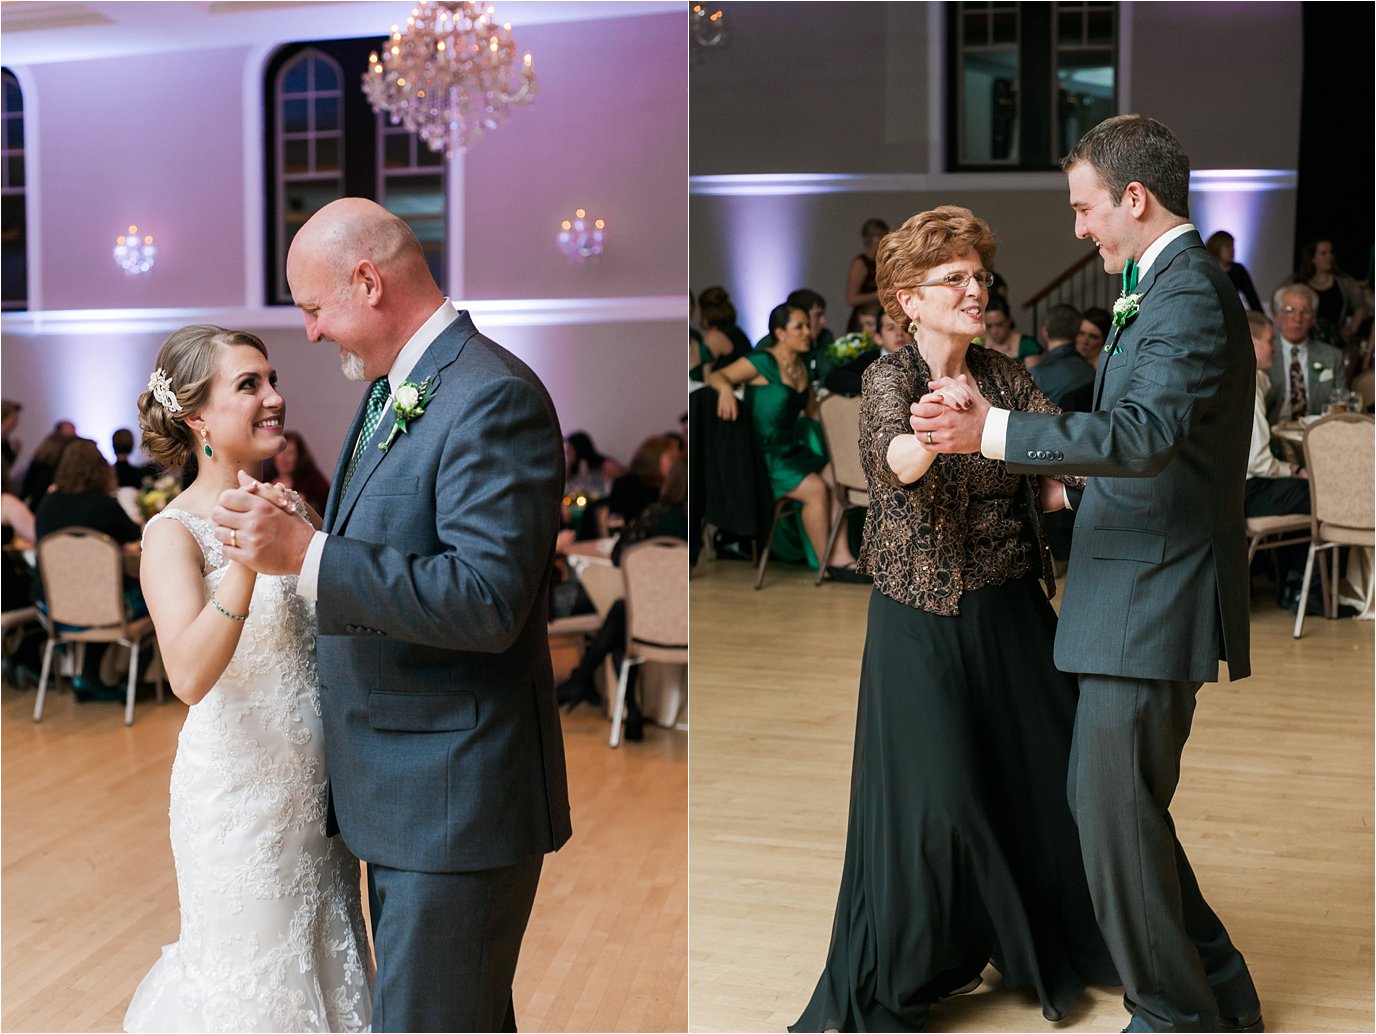 father-daughter and mother-son dancing